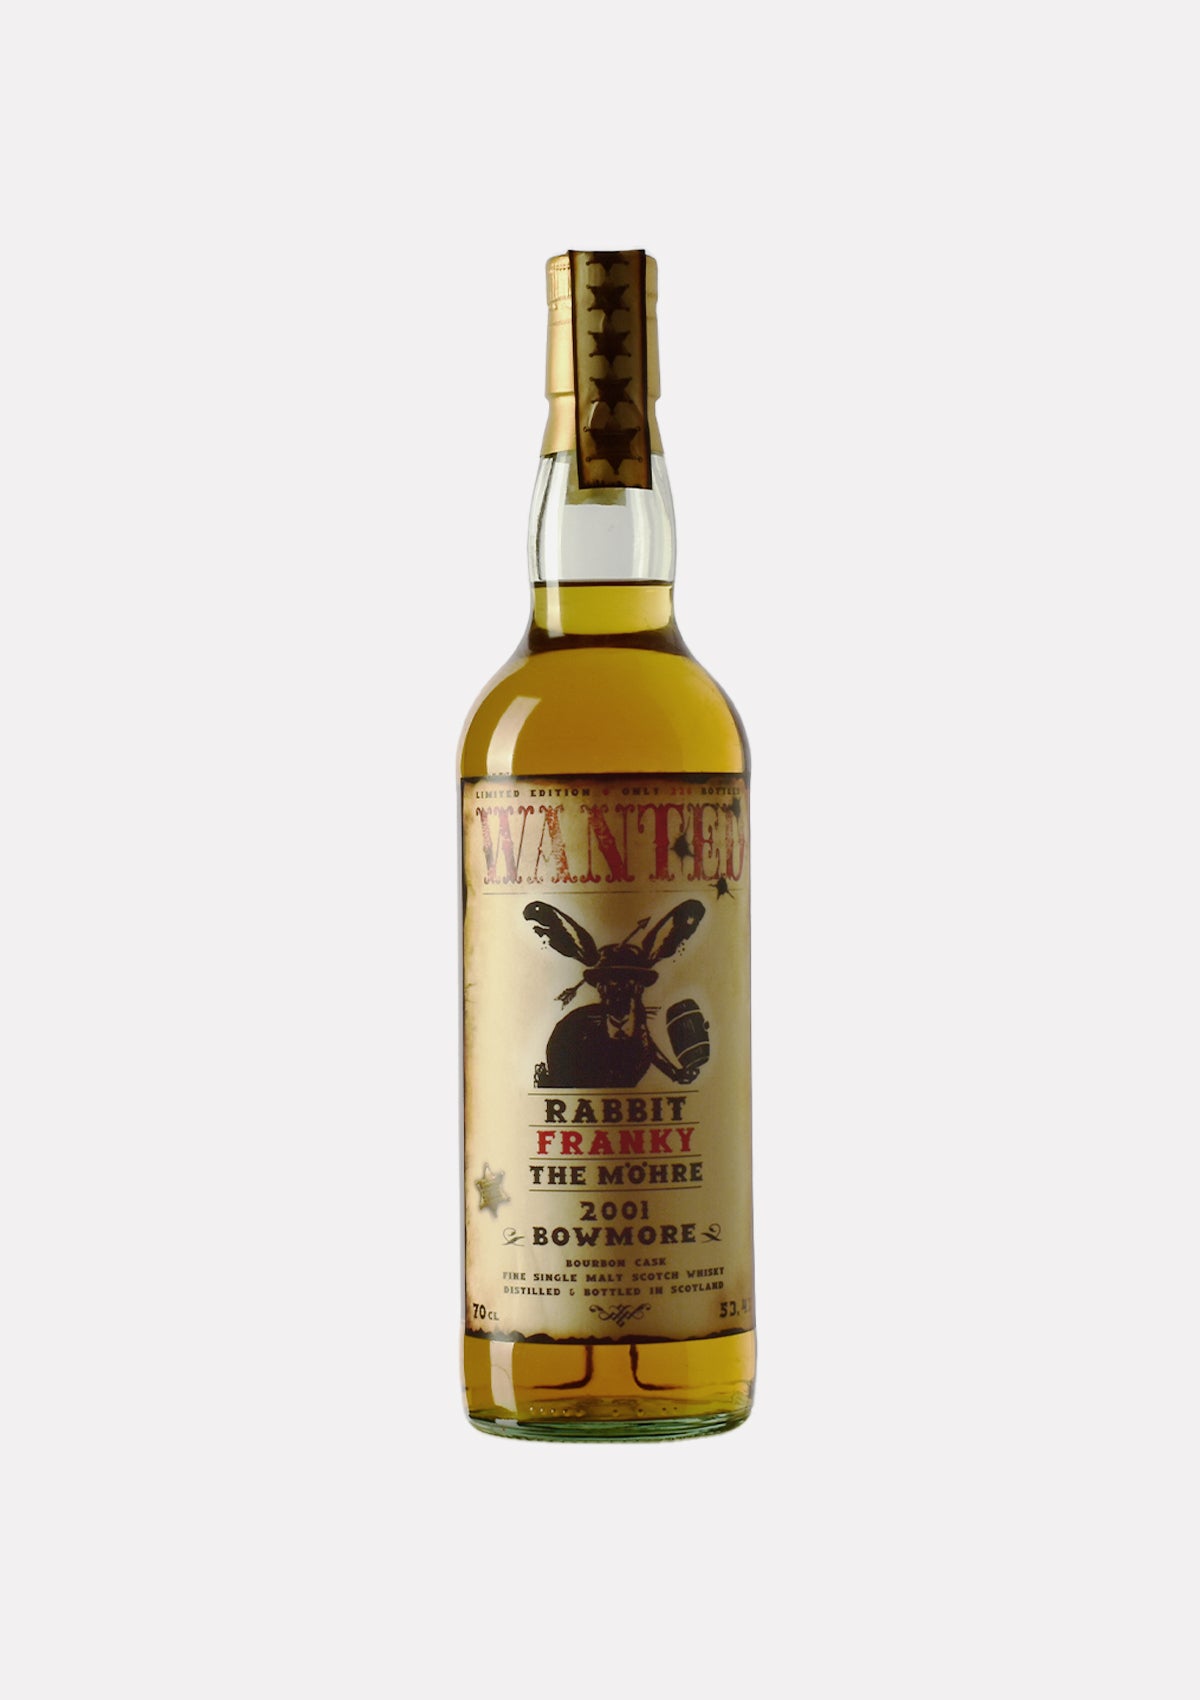 Bowmore 2001 Wanted Rabbit Franky The Möhre